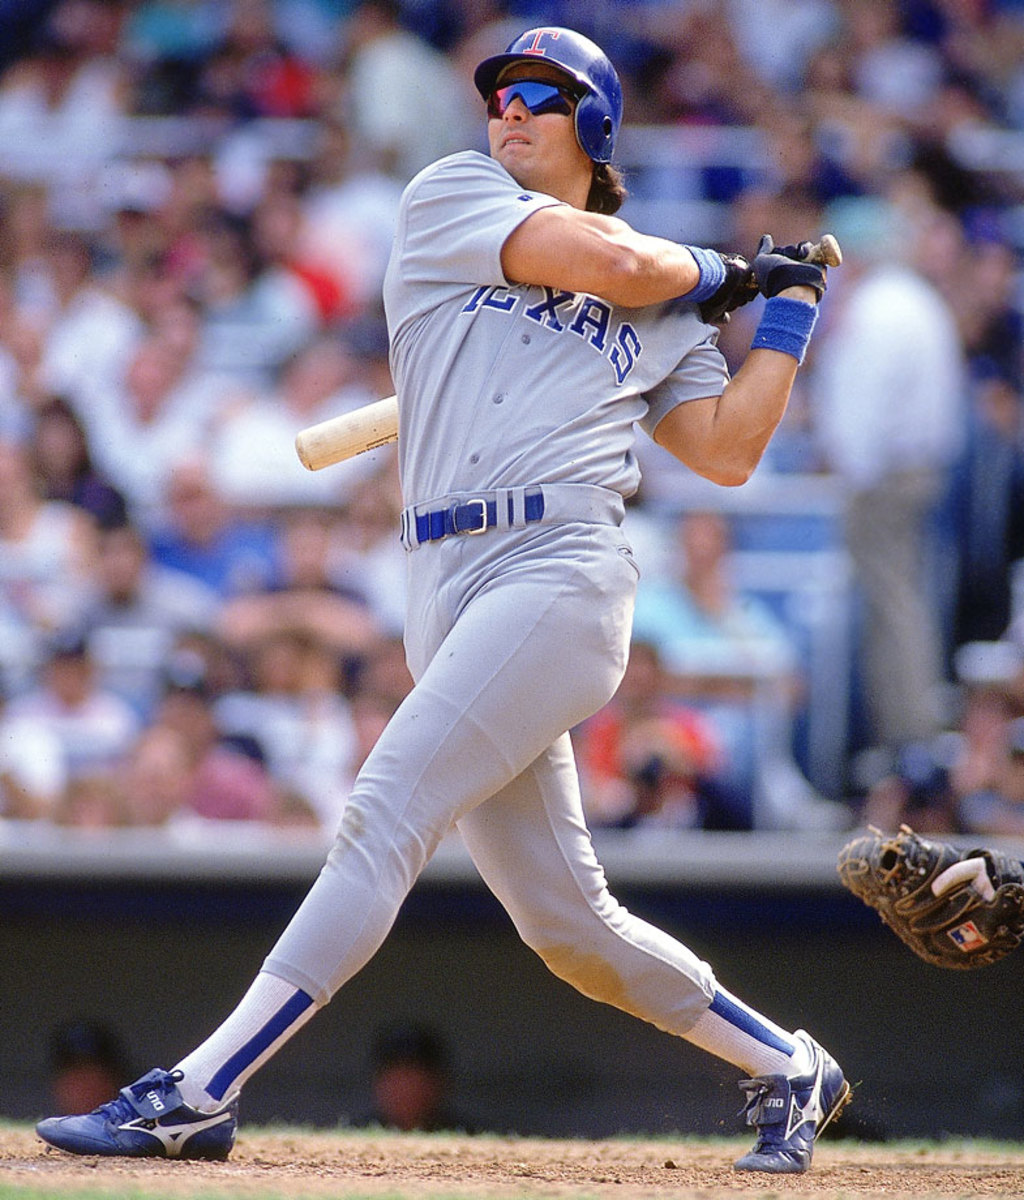 1992-Jose-Canseco-001298589.jpg